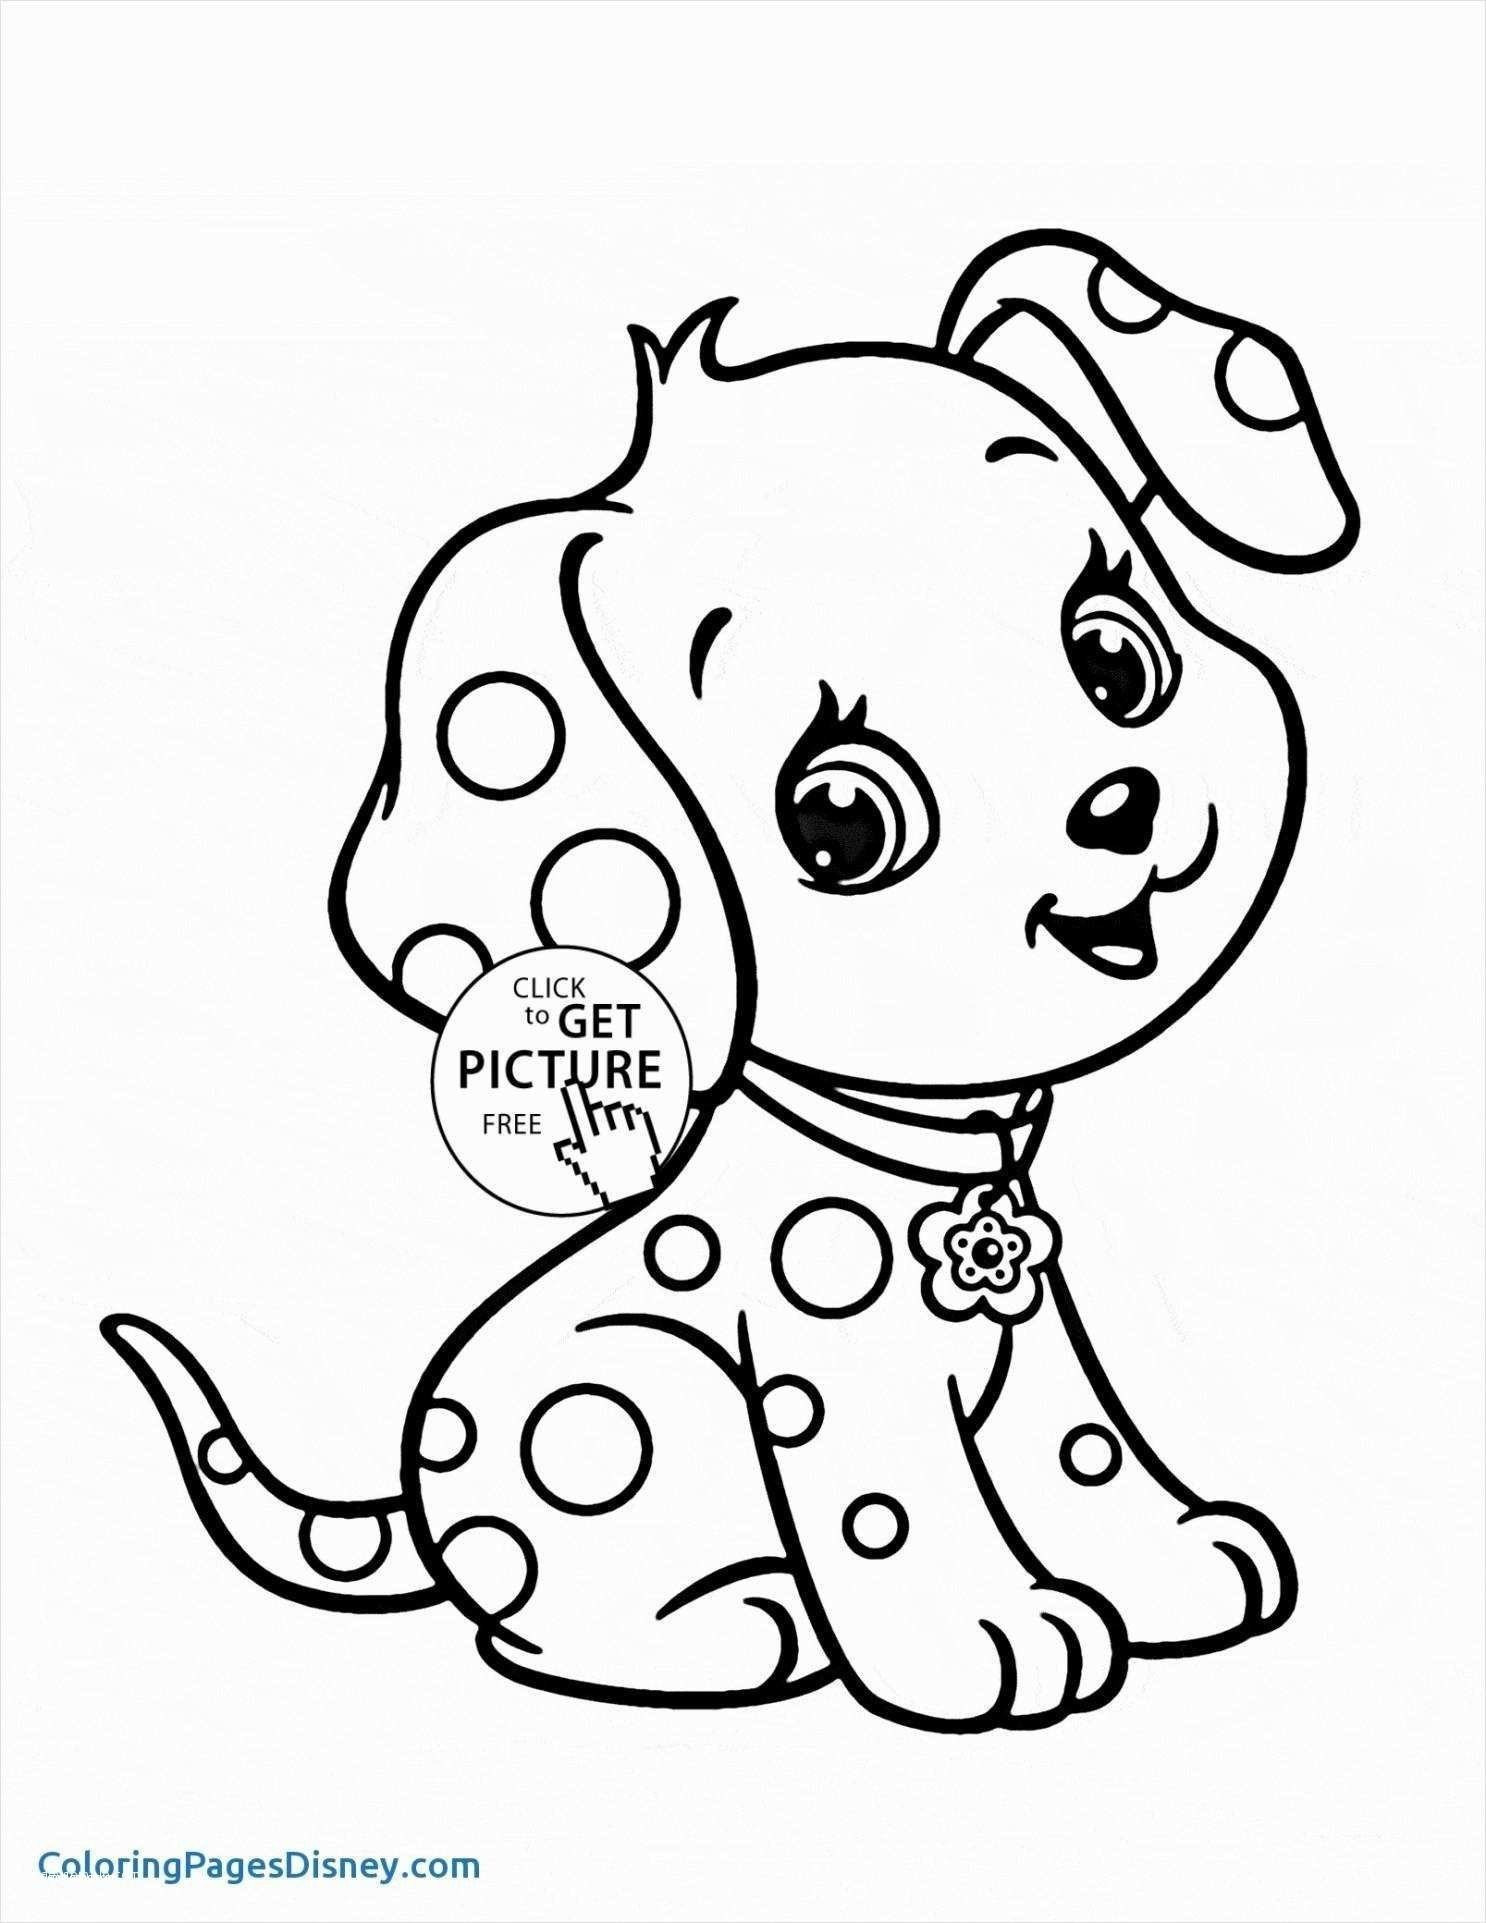 Personalized Coloring Book Coloring Pages